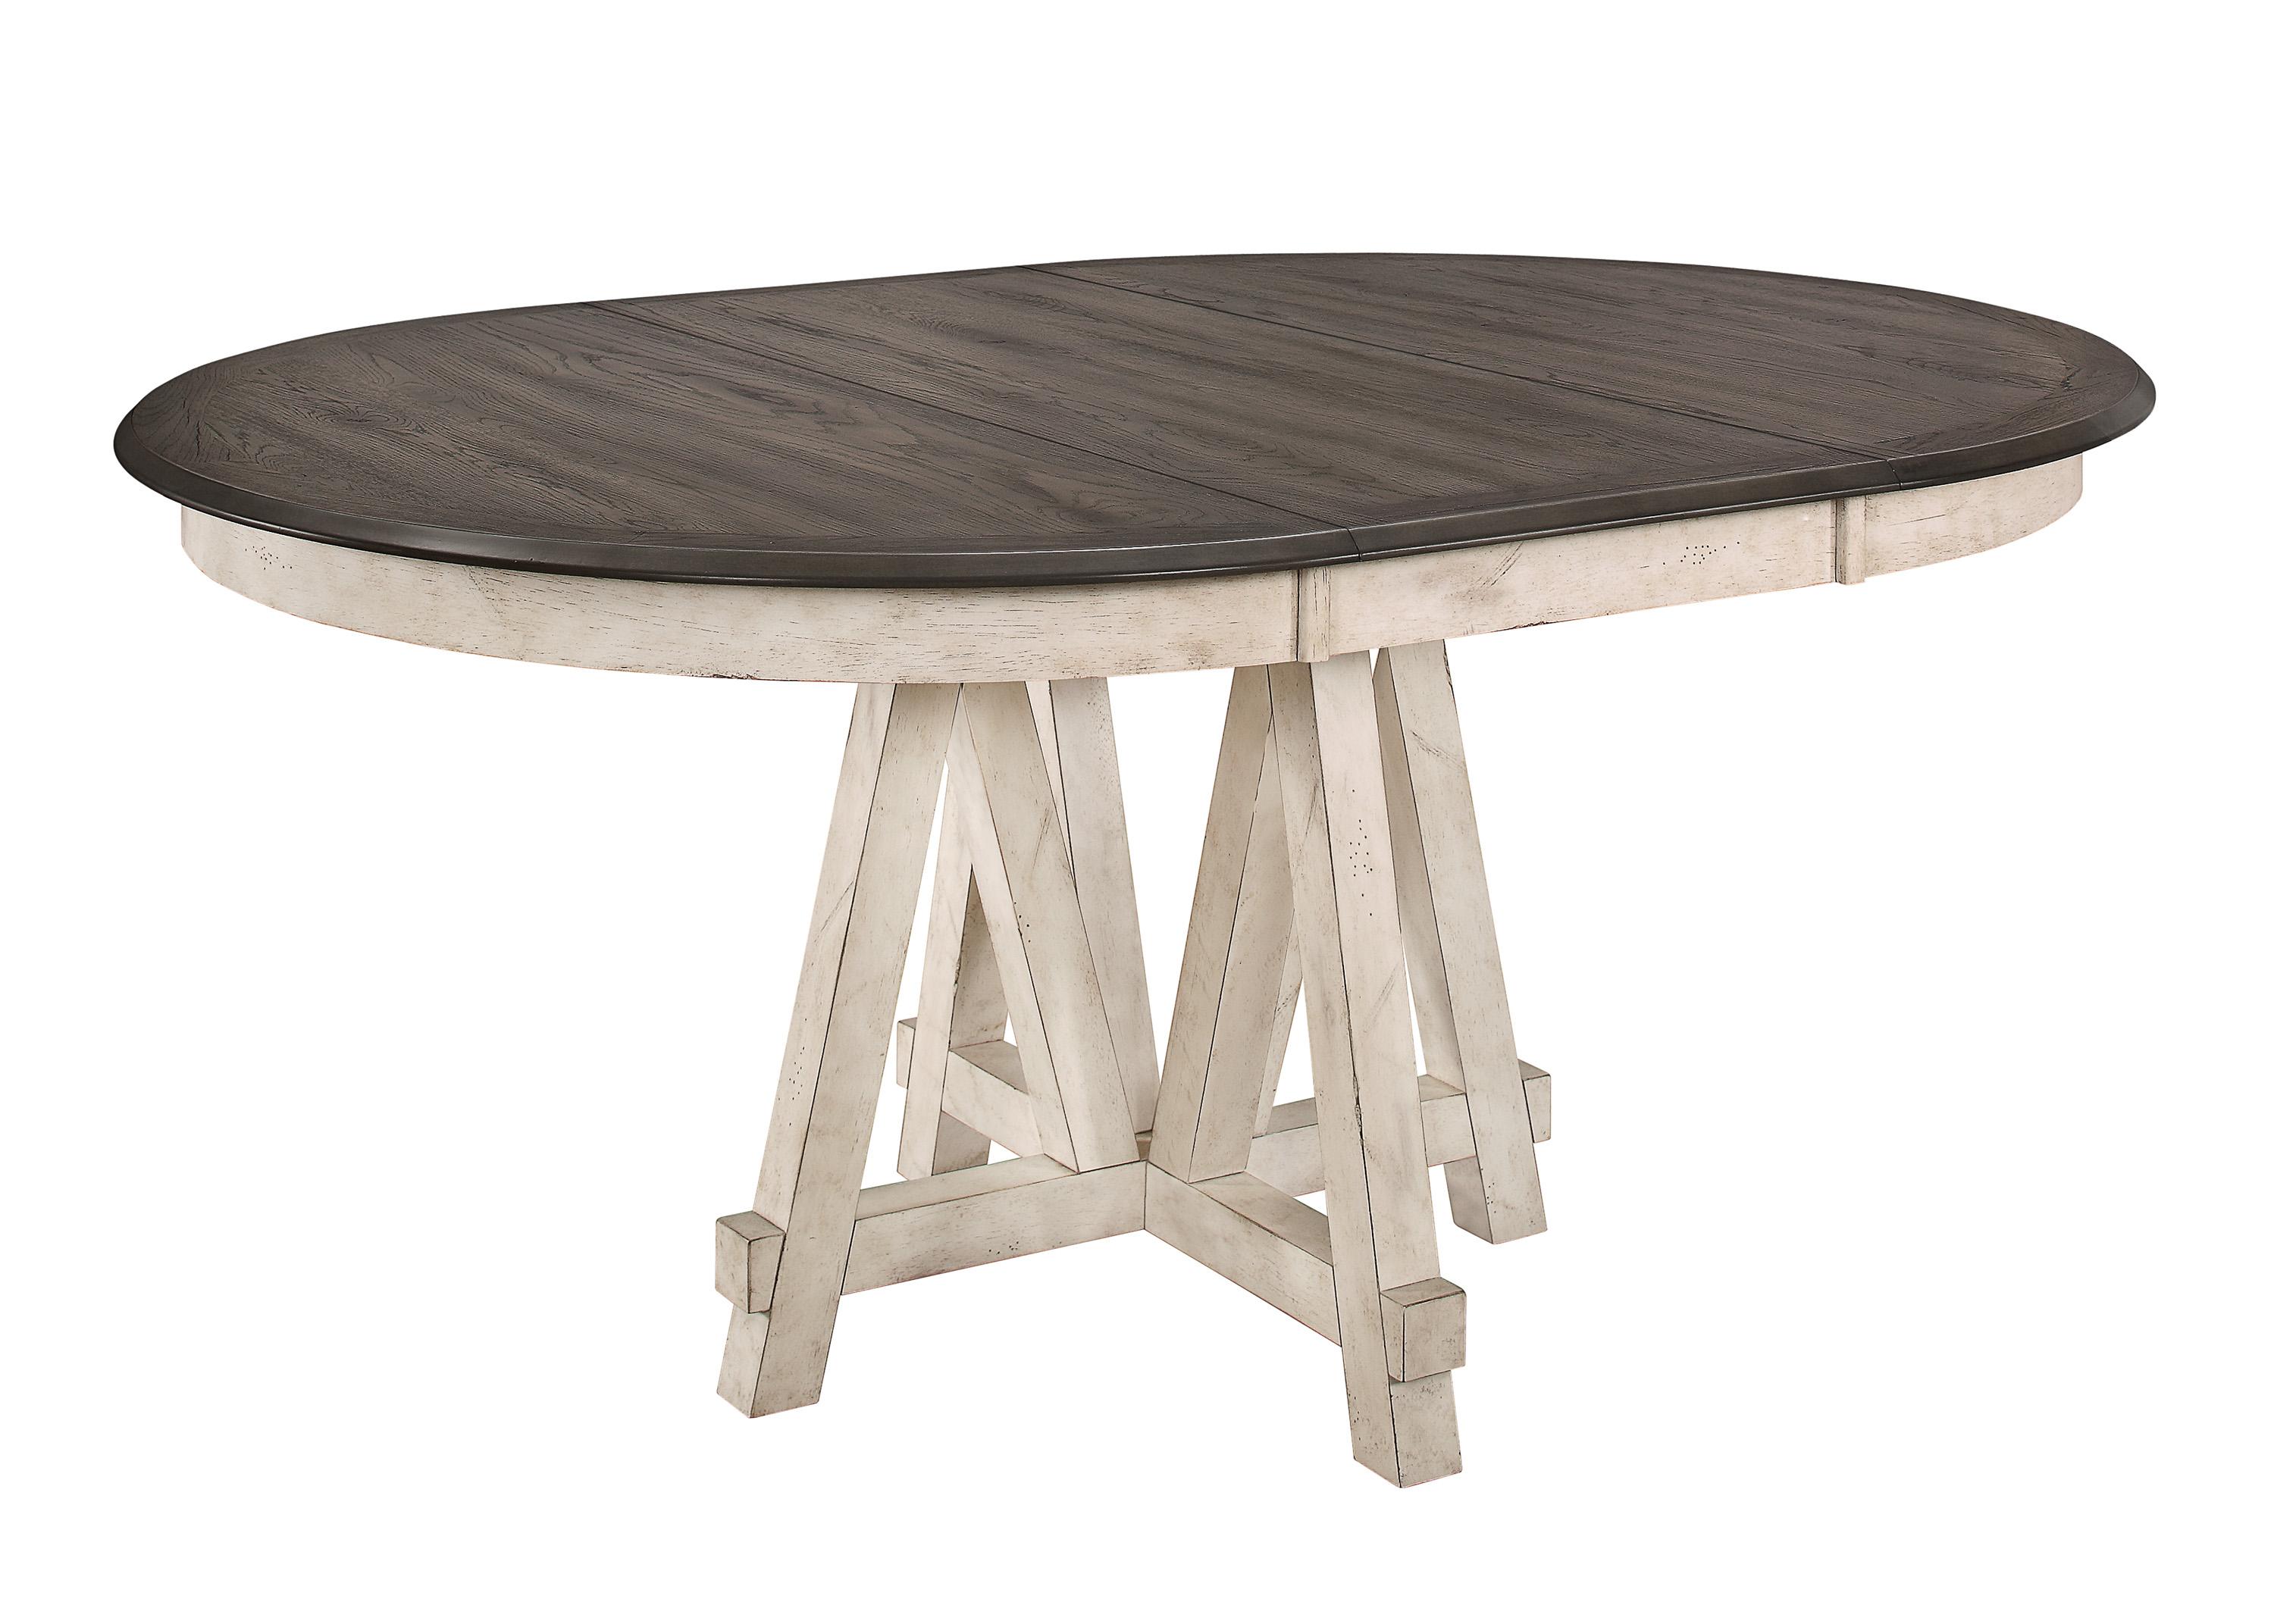 Rustic Dining Table 5656-66* Clover 5656-66* in Antique White, Gray 